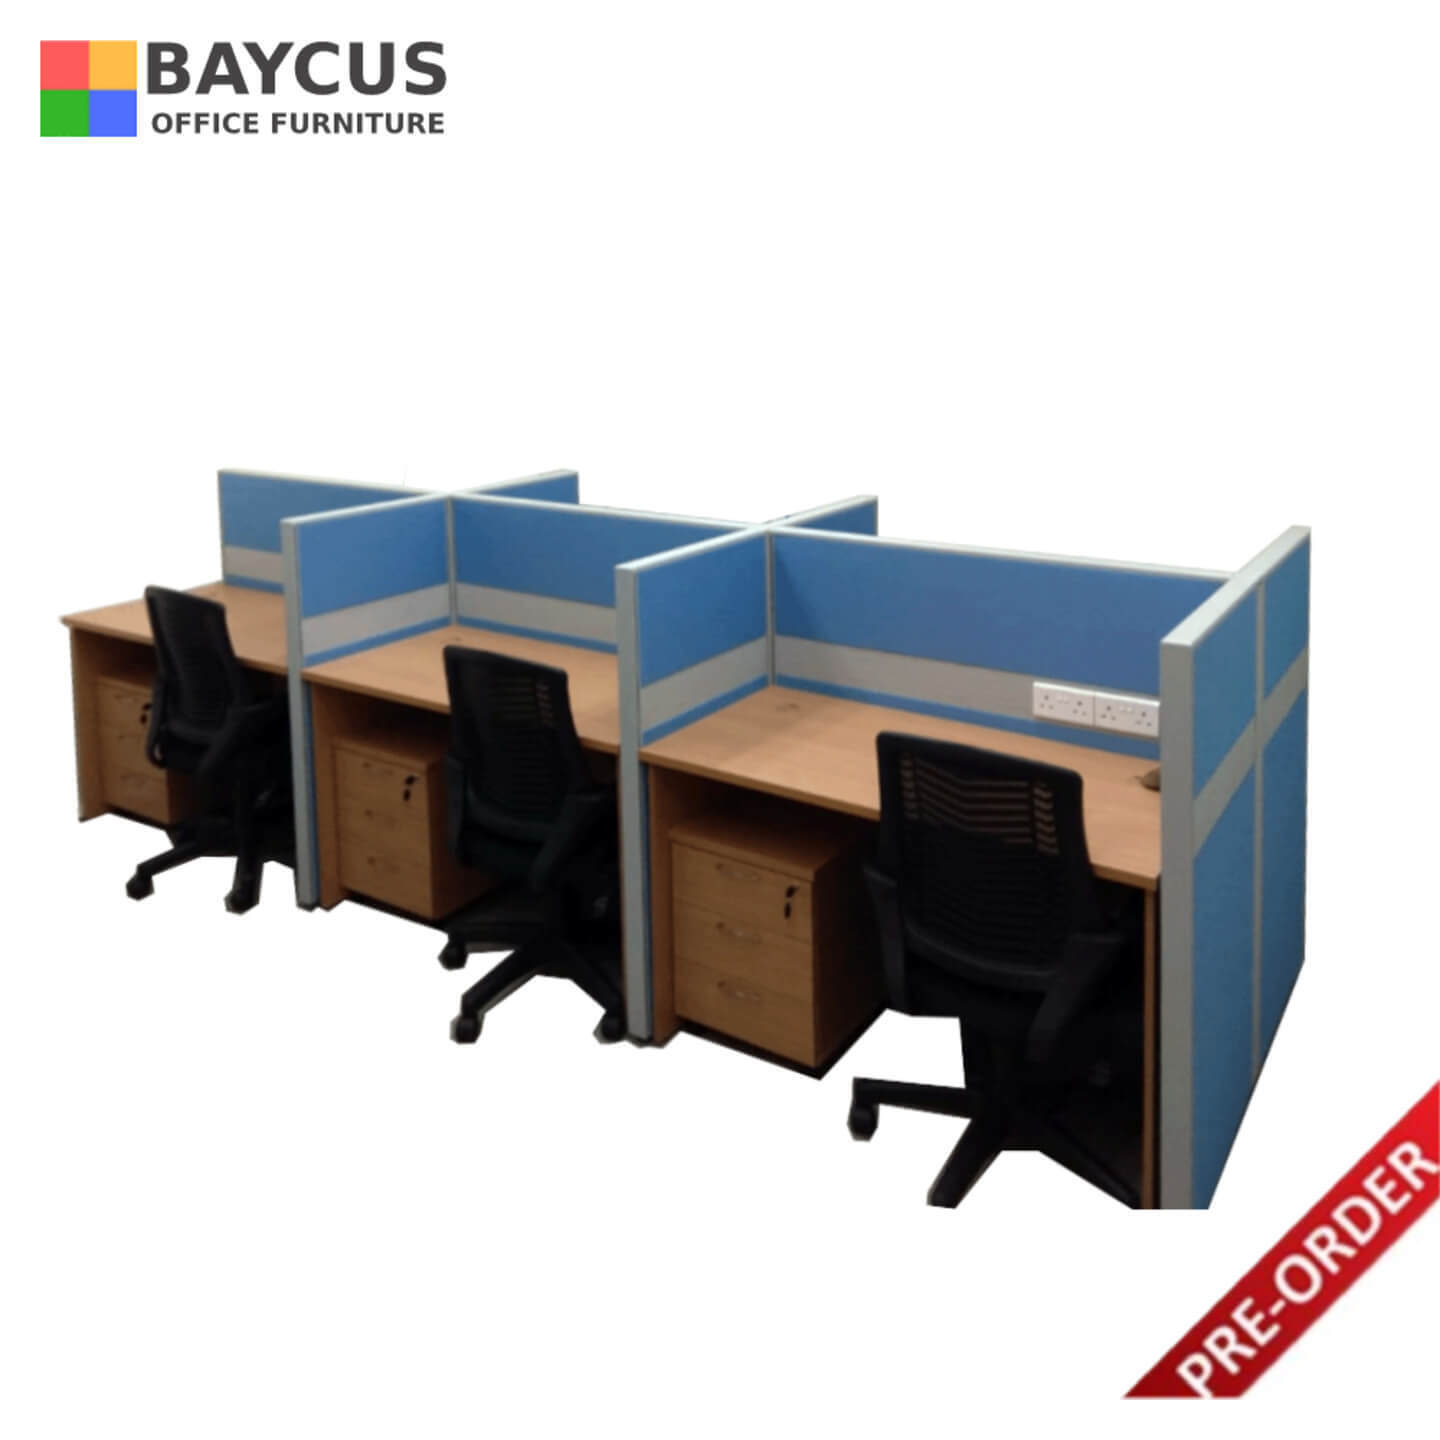 BAY54 Partition System for 6 Pax (Partition Only)